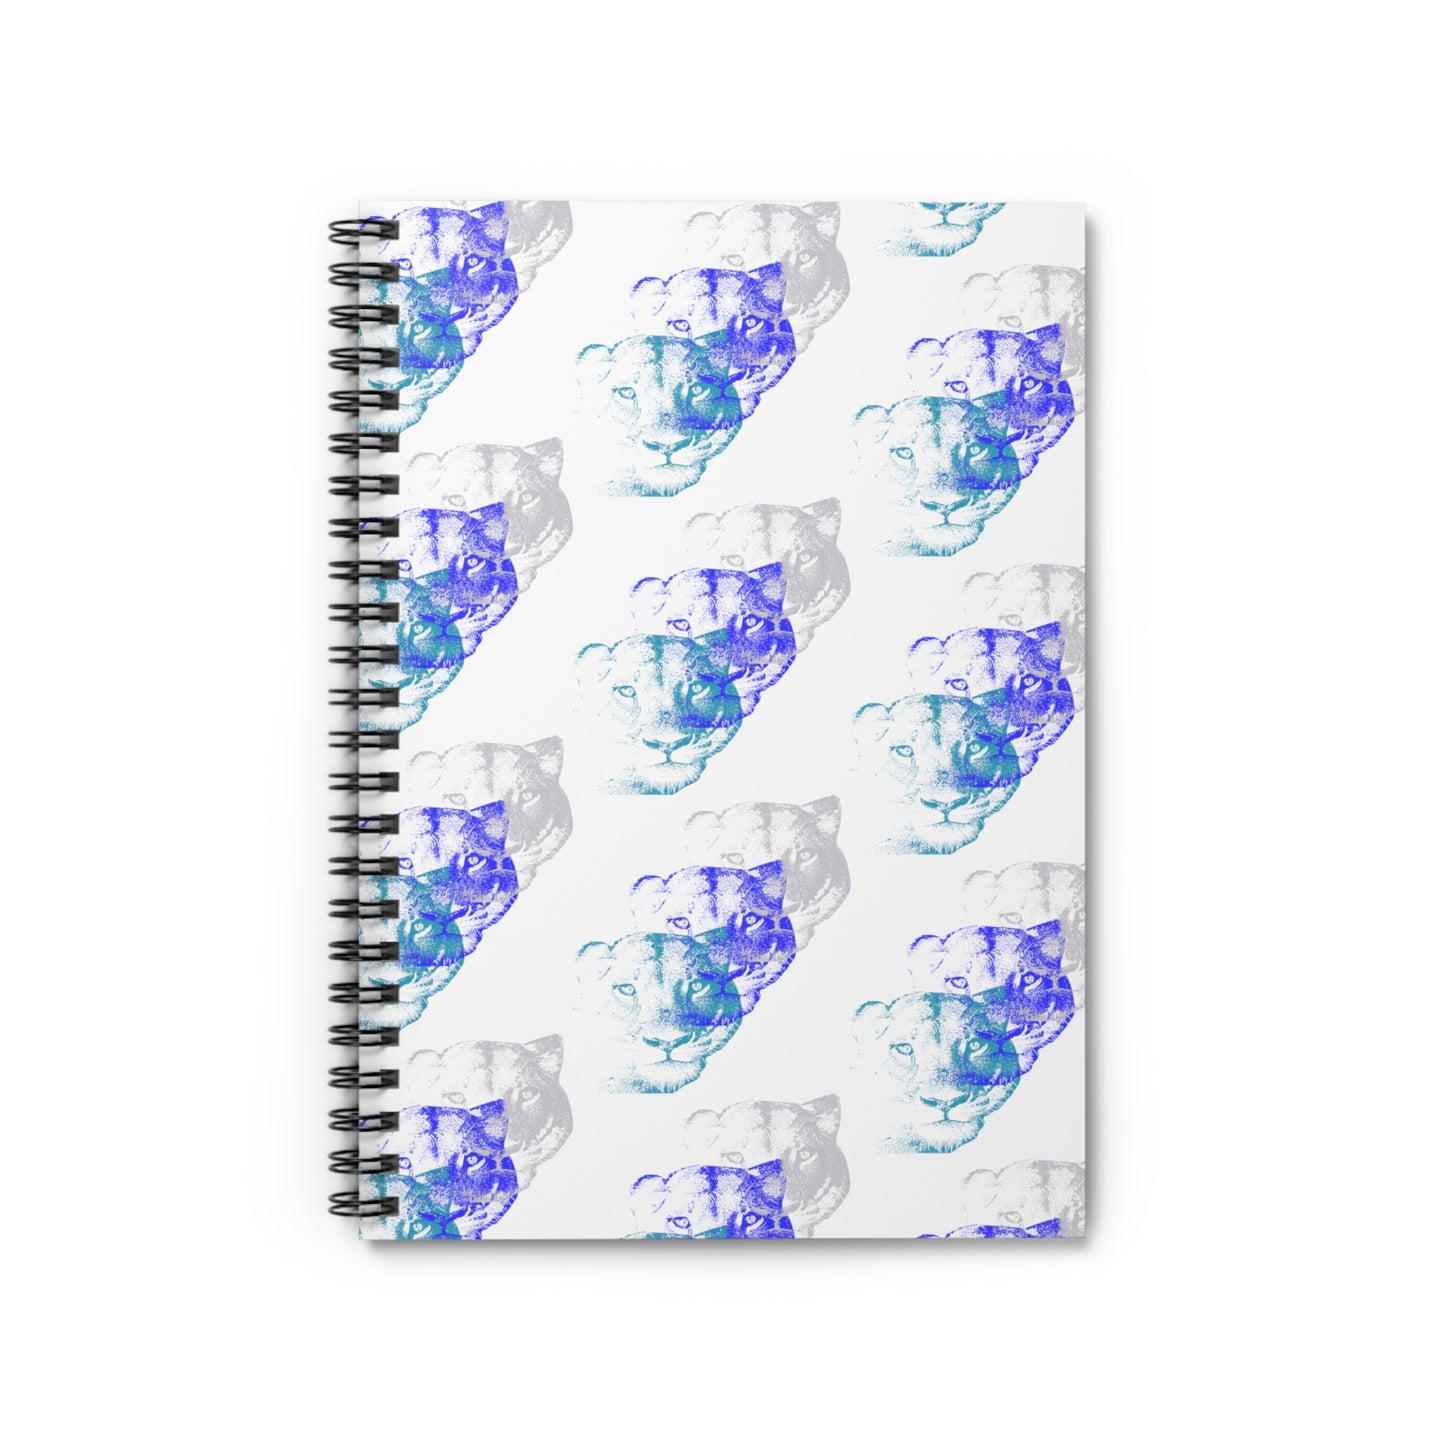 Lioness Arising - Spiral Notebook - Ruled Line - wht